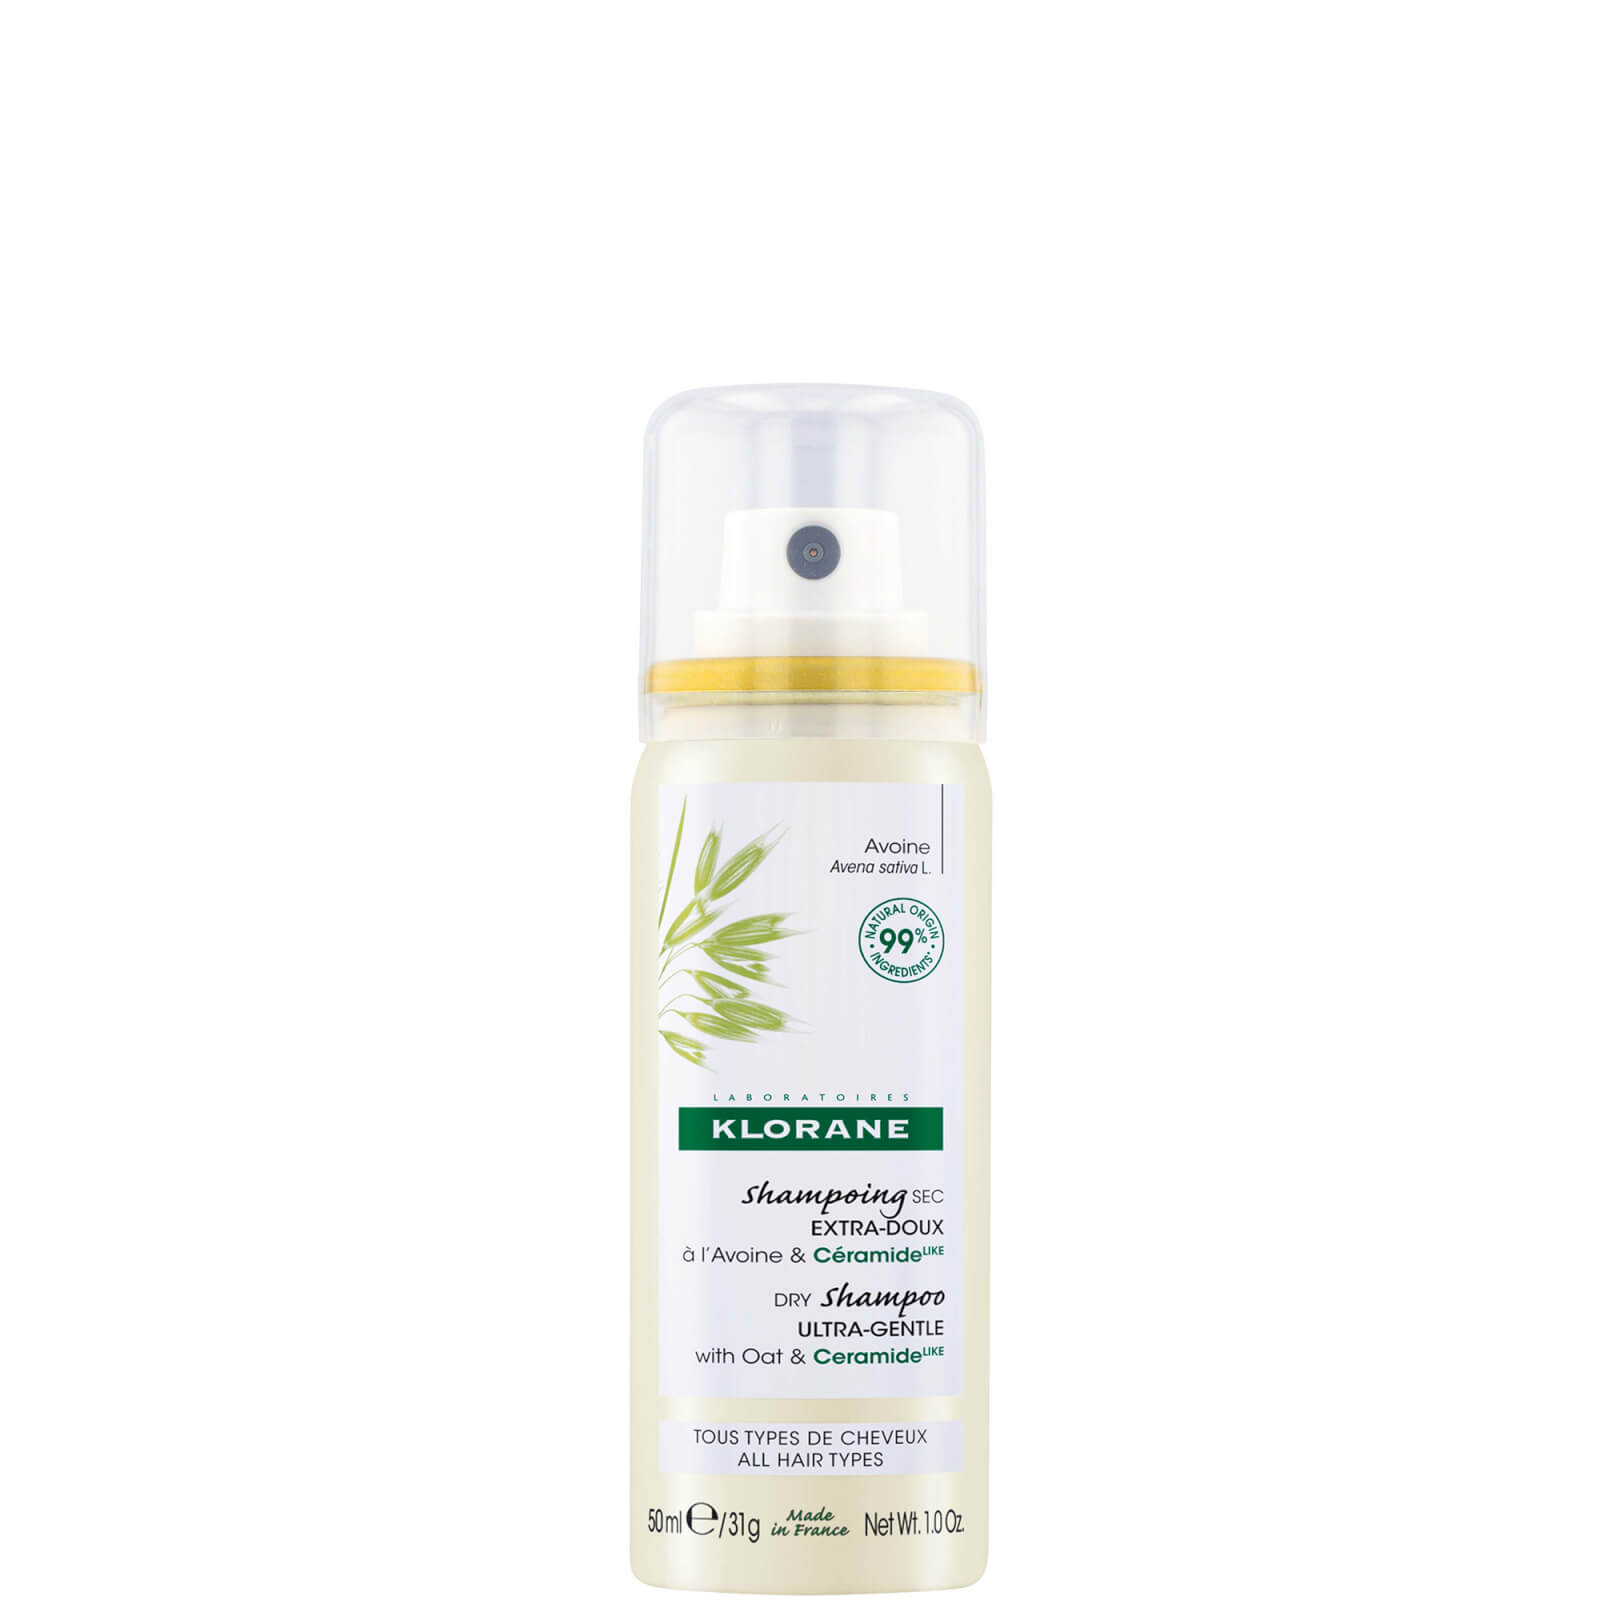 KLORANE Extra-Gentle Dry Shampoo for All Hair Types with Oat and Ceramide 50ml